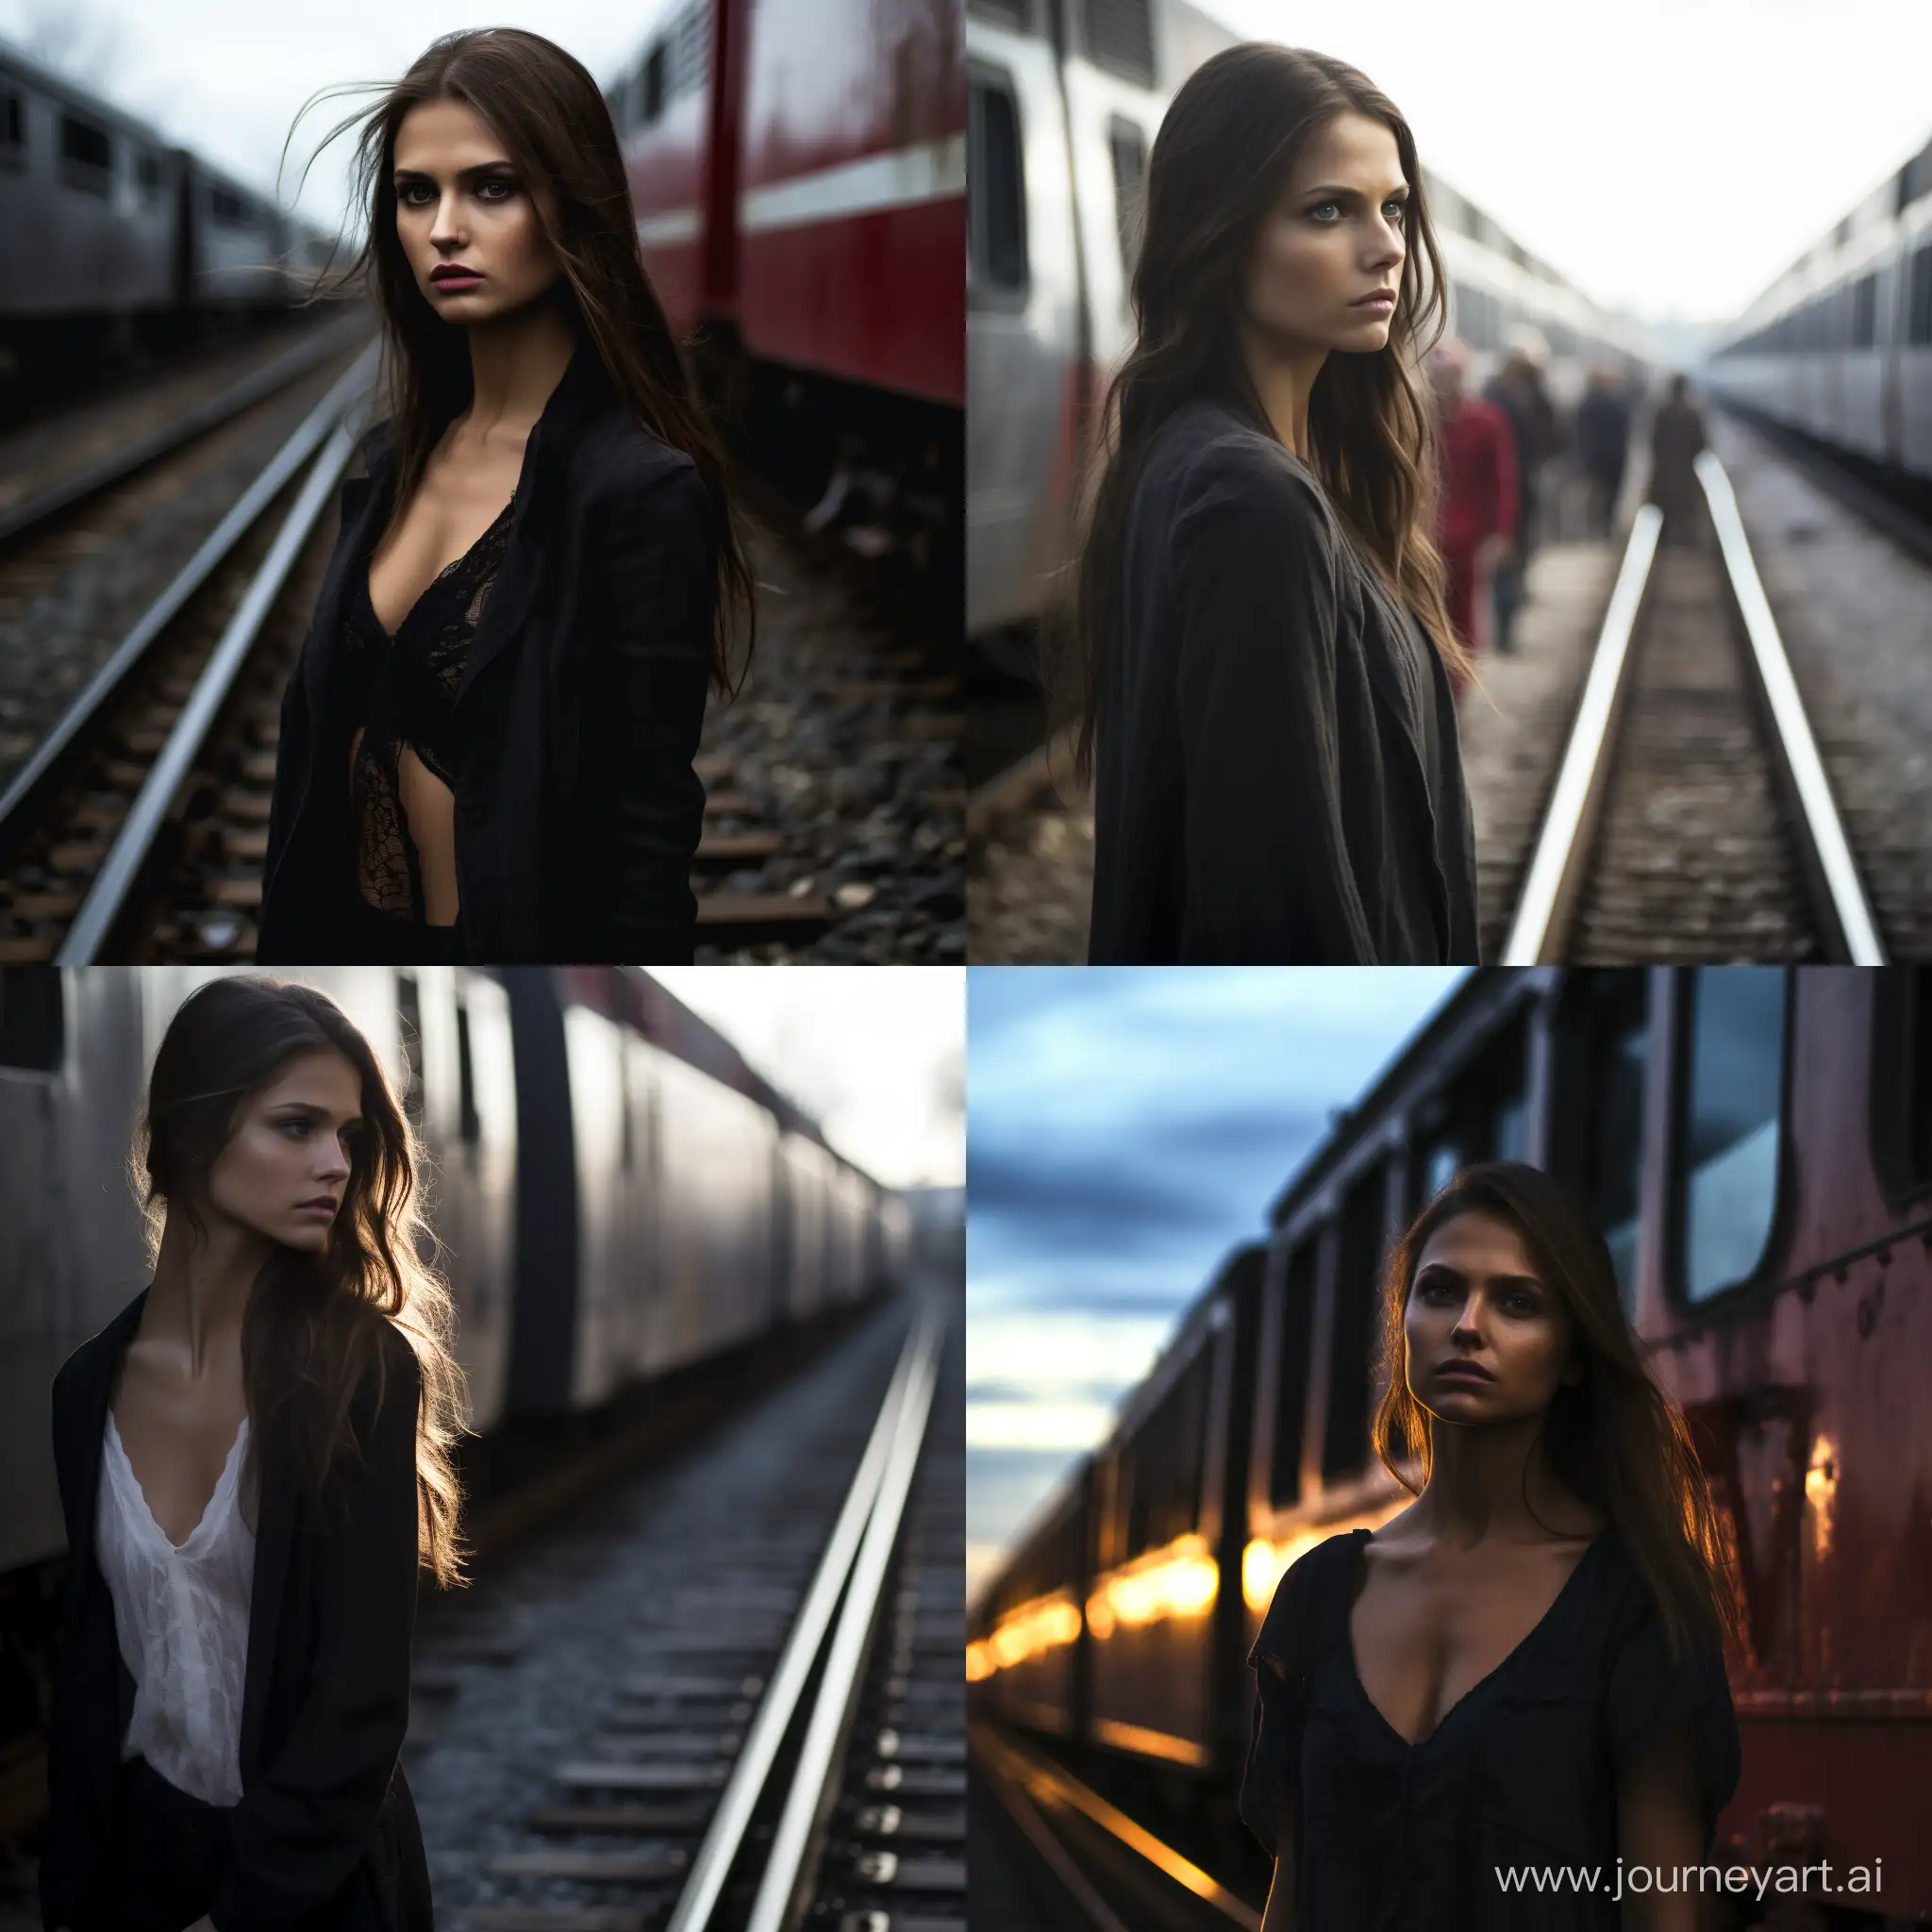 The character of the Vampire Diaries series Elena Gilbert stands sad near the train as real 